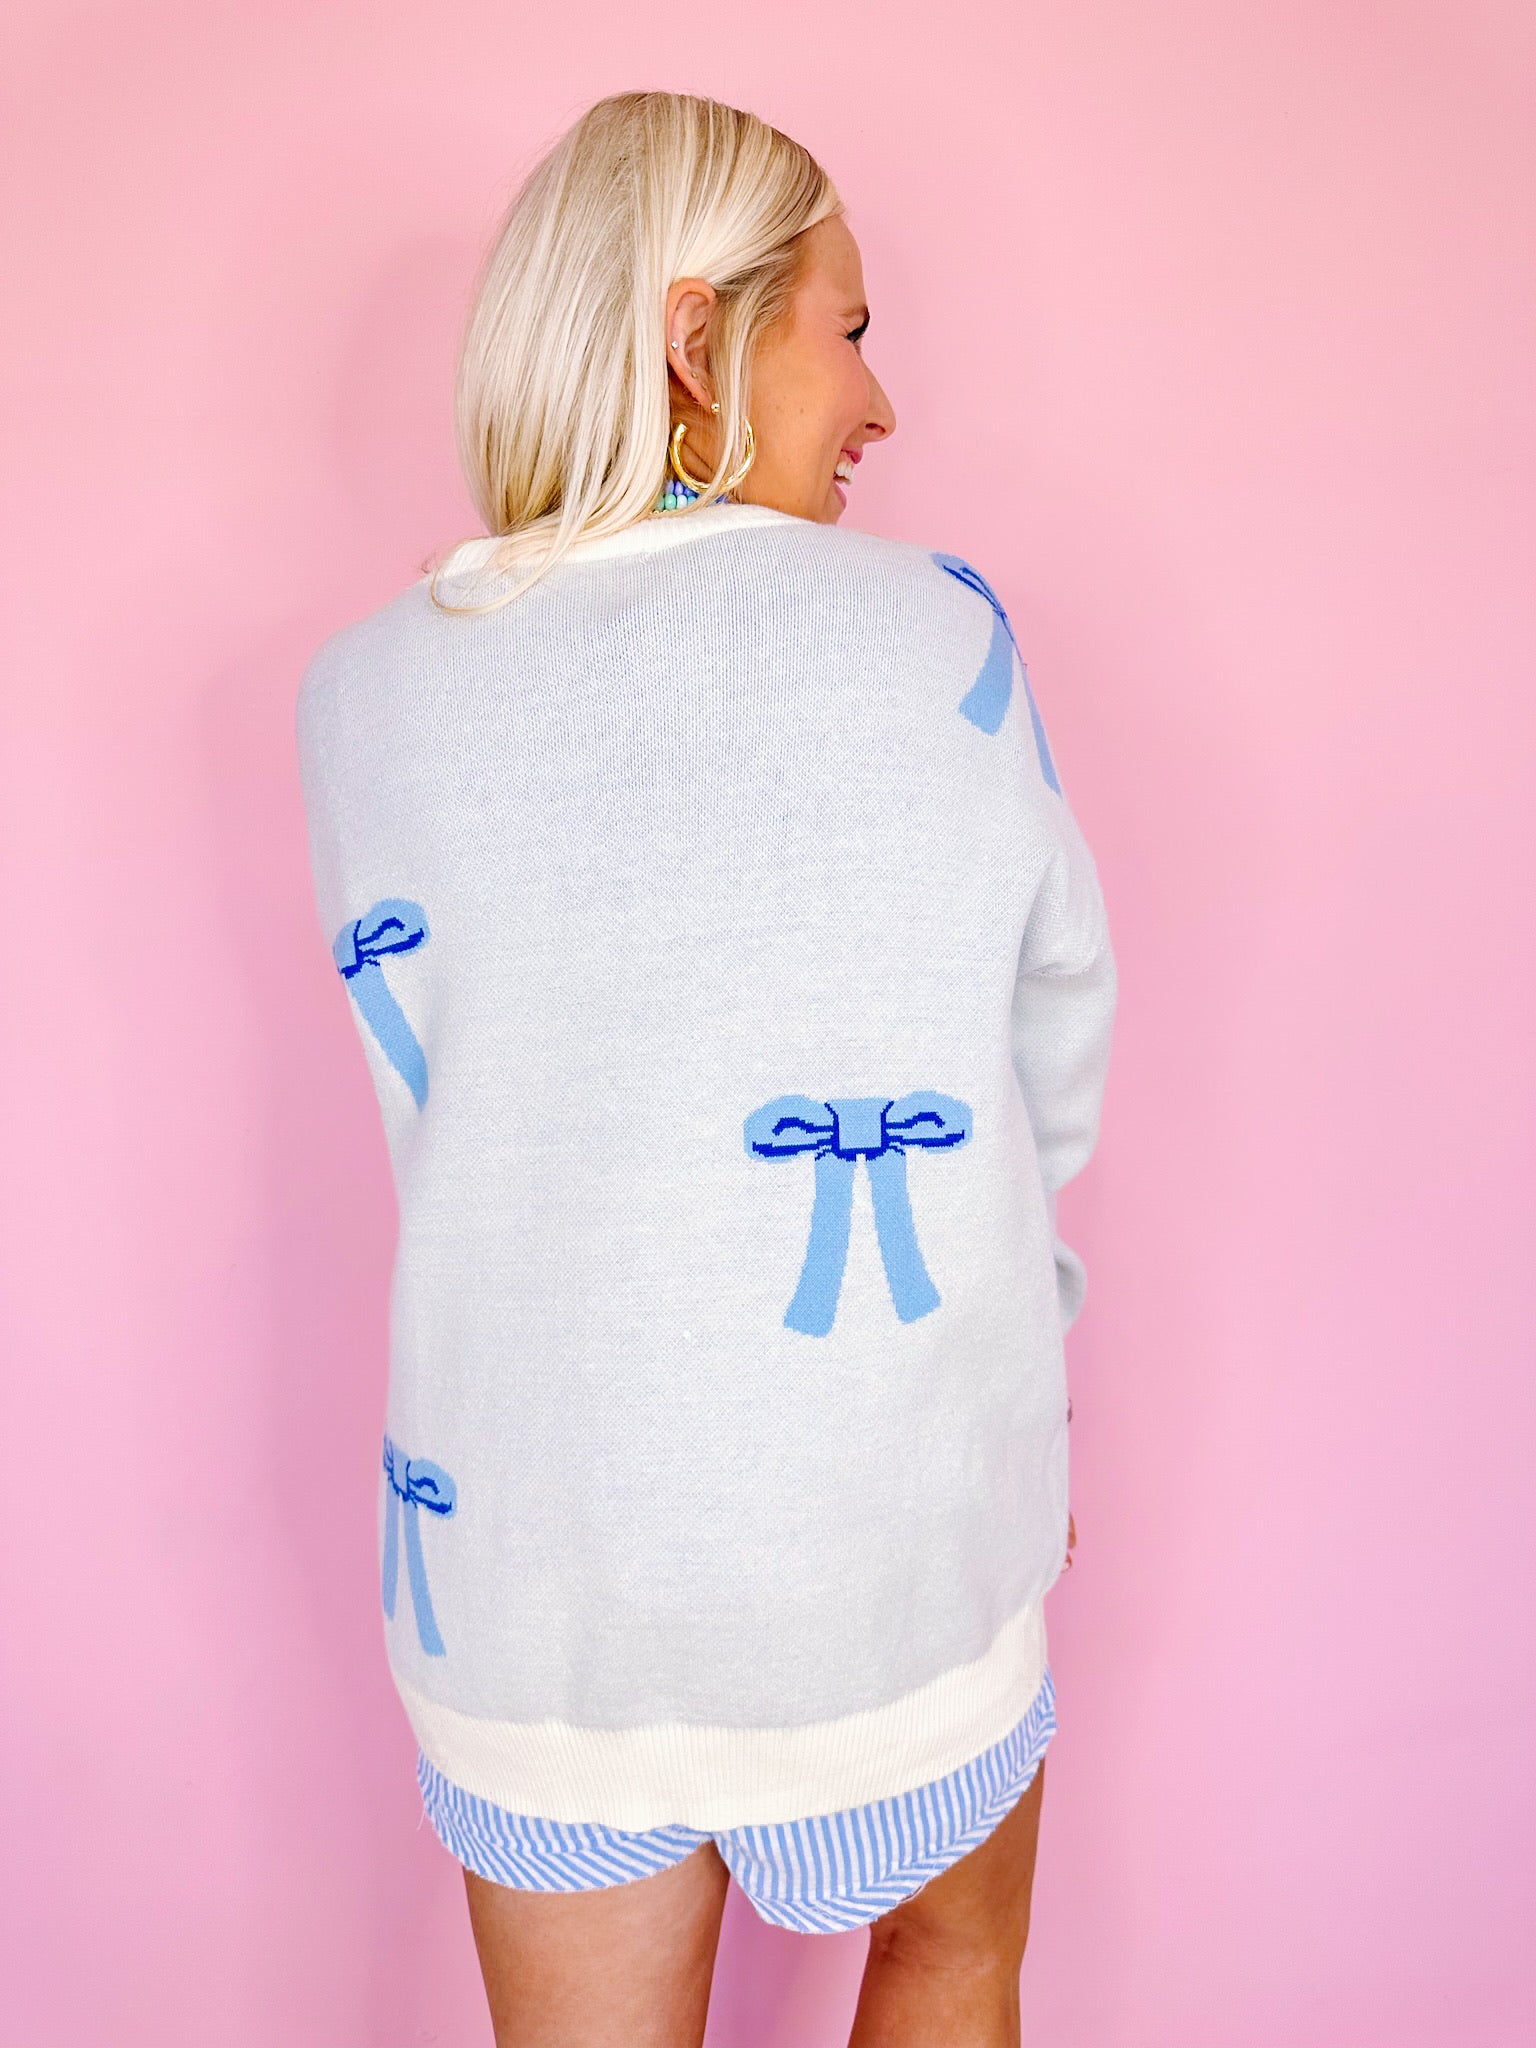 TIED UP IN A BOW CARDIGAN - BLUE